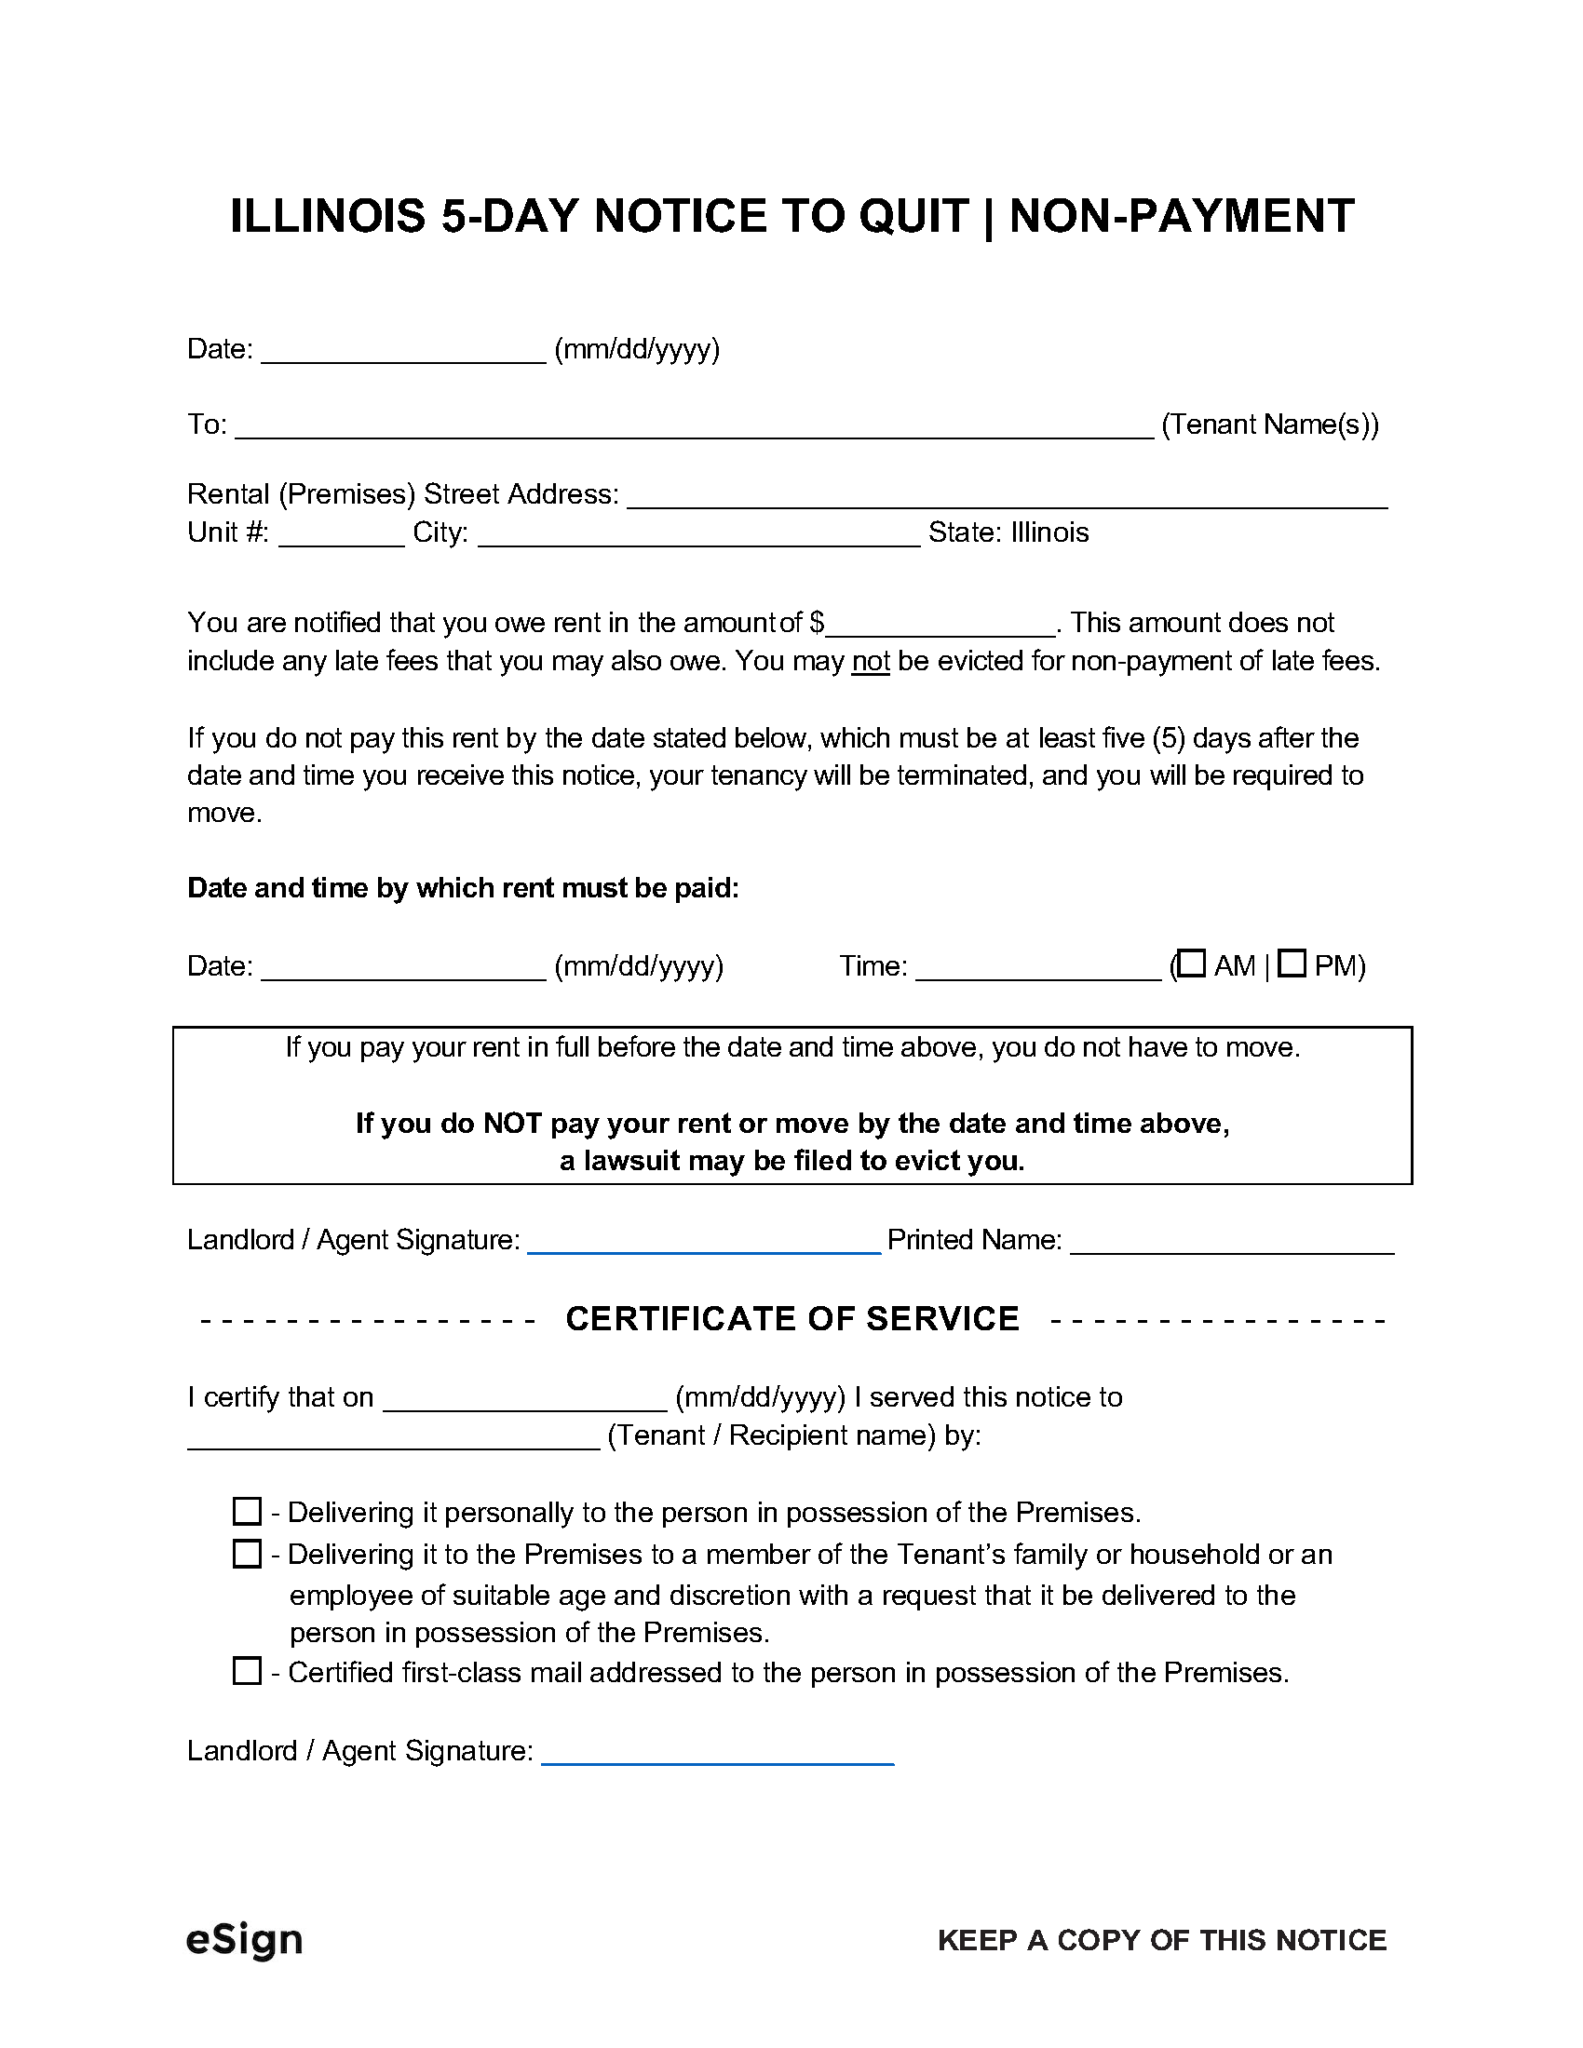 free-illinois-eviction-notice-forms-process-and-law-legal-templates